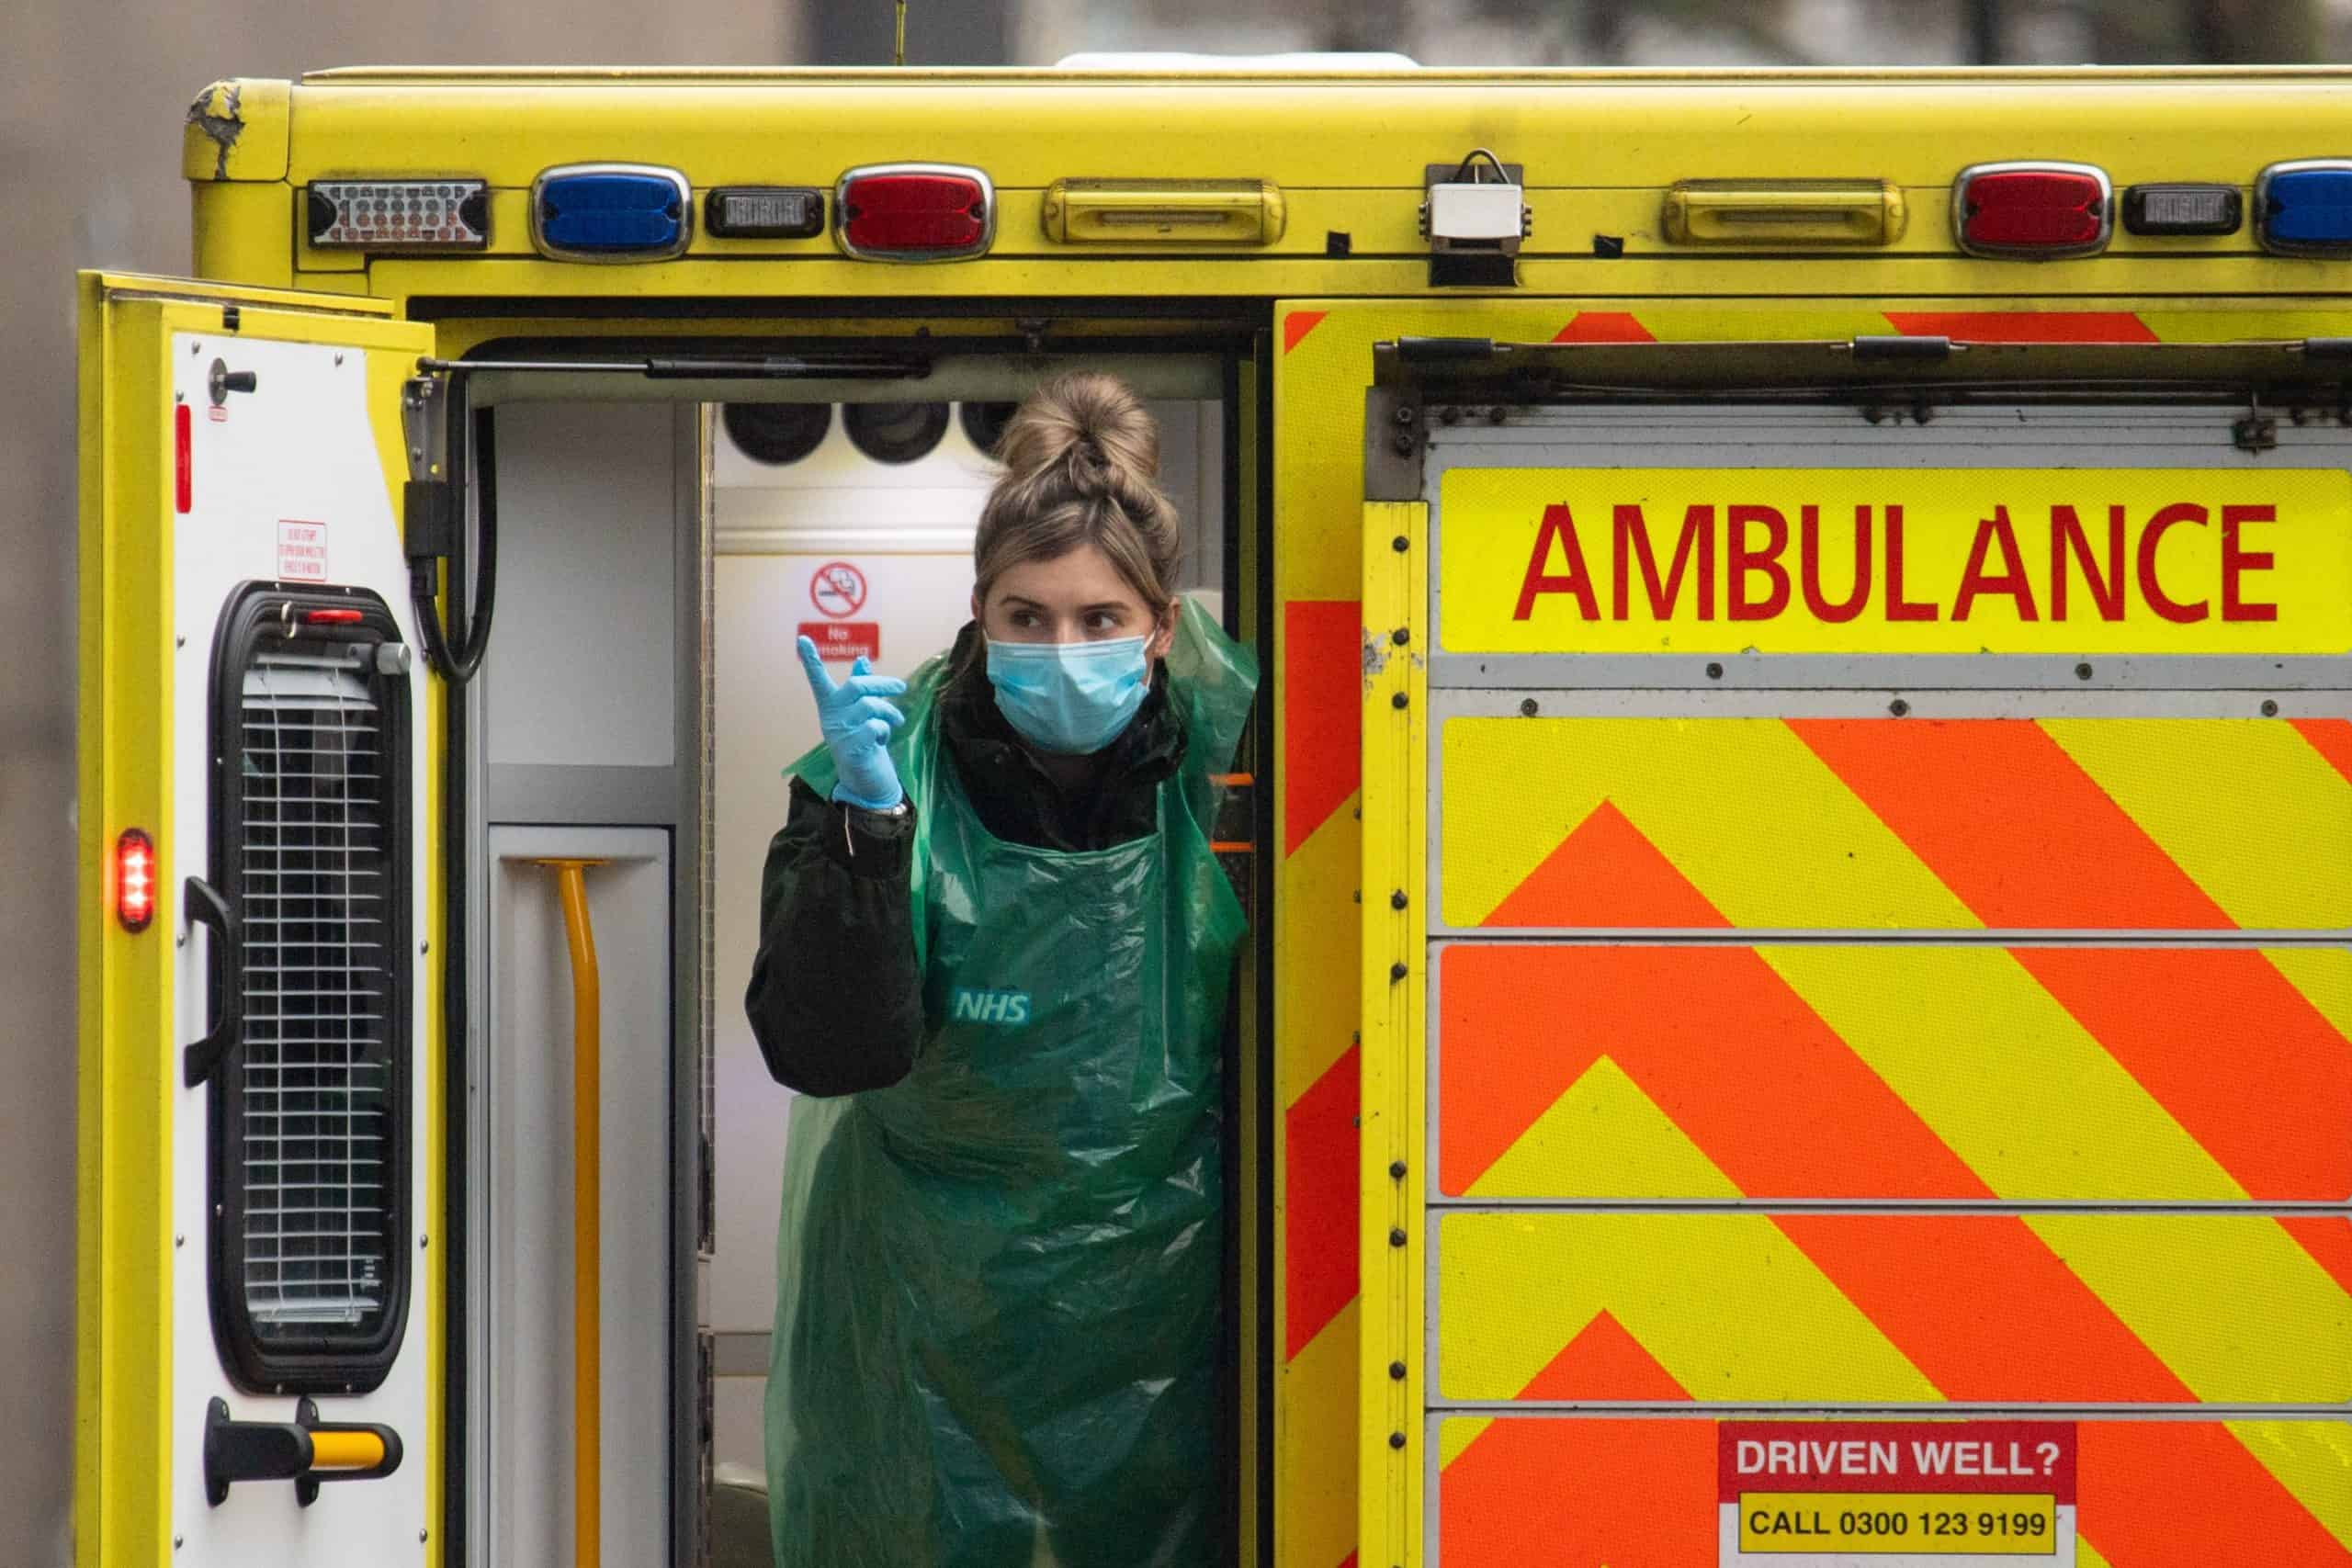 Latest Covid figures “terrifying” as UK records fifth consecutive day of over 1k deaths